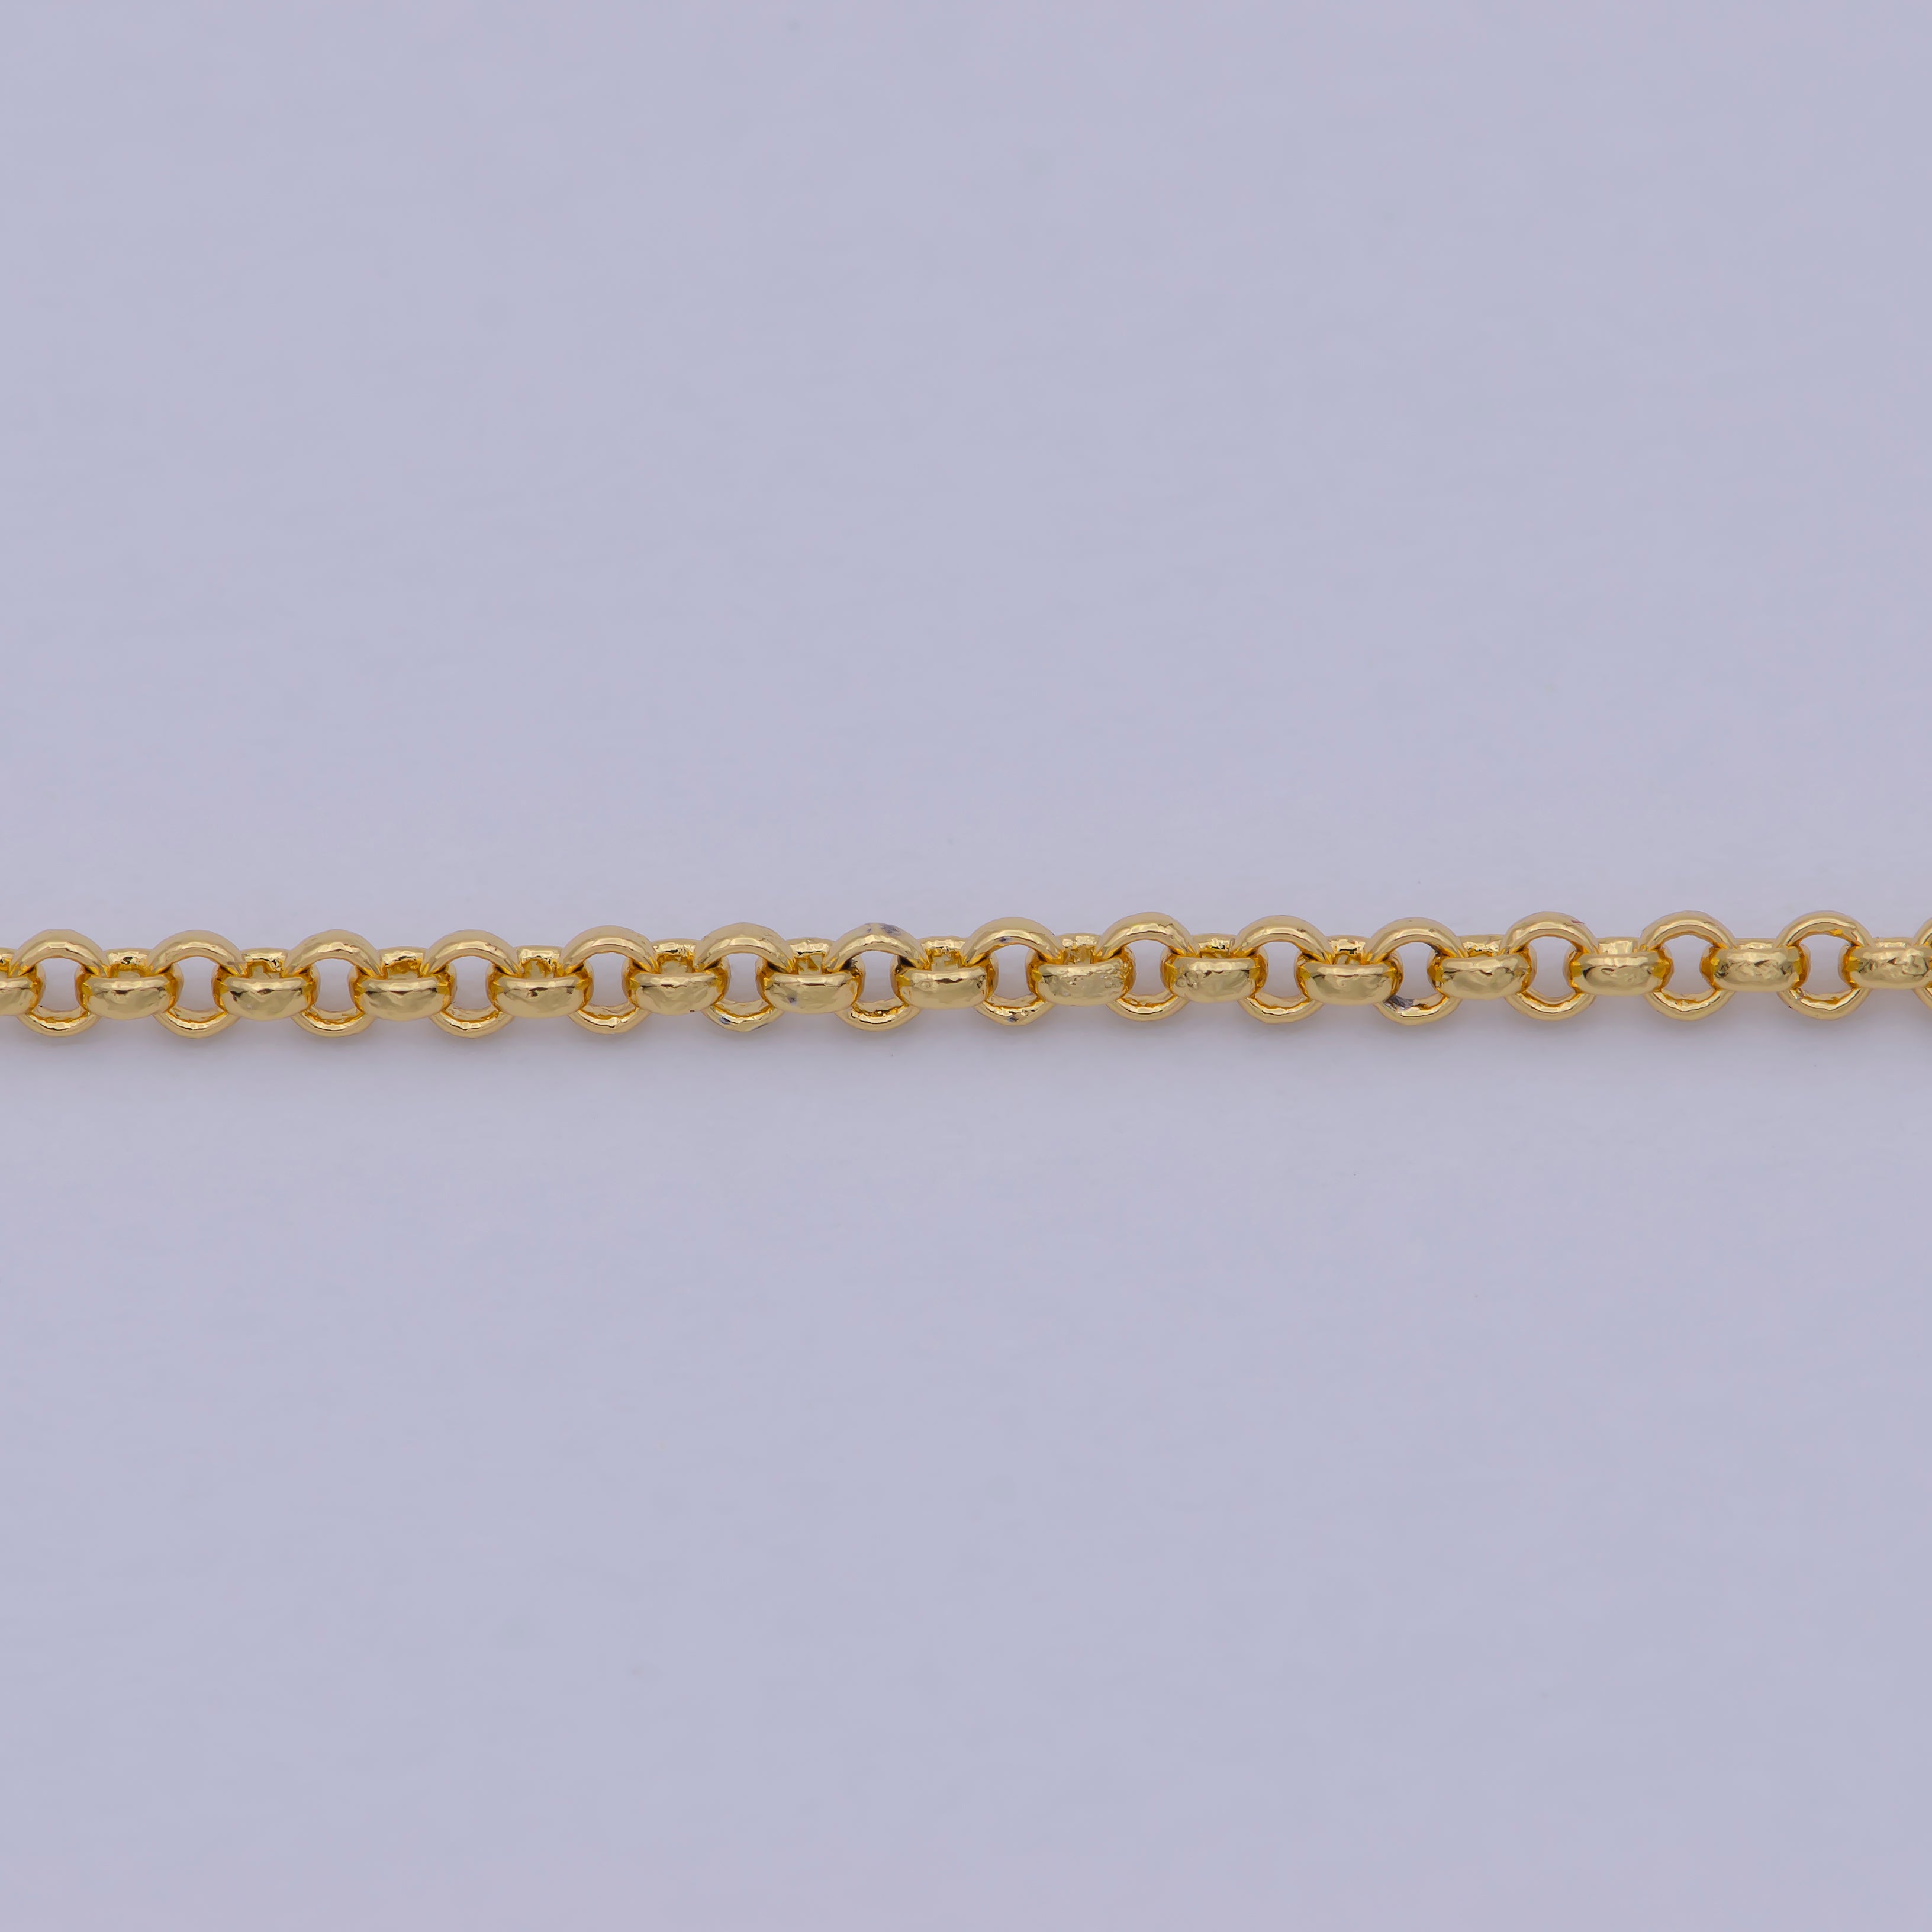 24K Gold Filled Rolo Chain Necklace, 17.7 Inch Cable Chain Necklace, Dainty 1.5mm Link Necklace | WA-468 - DLUXCA